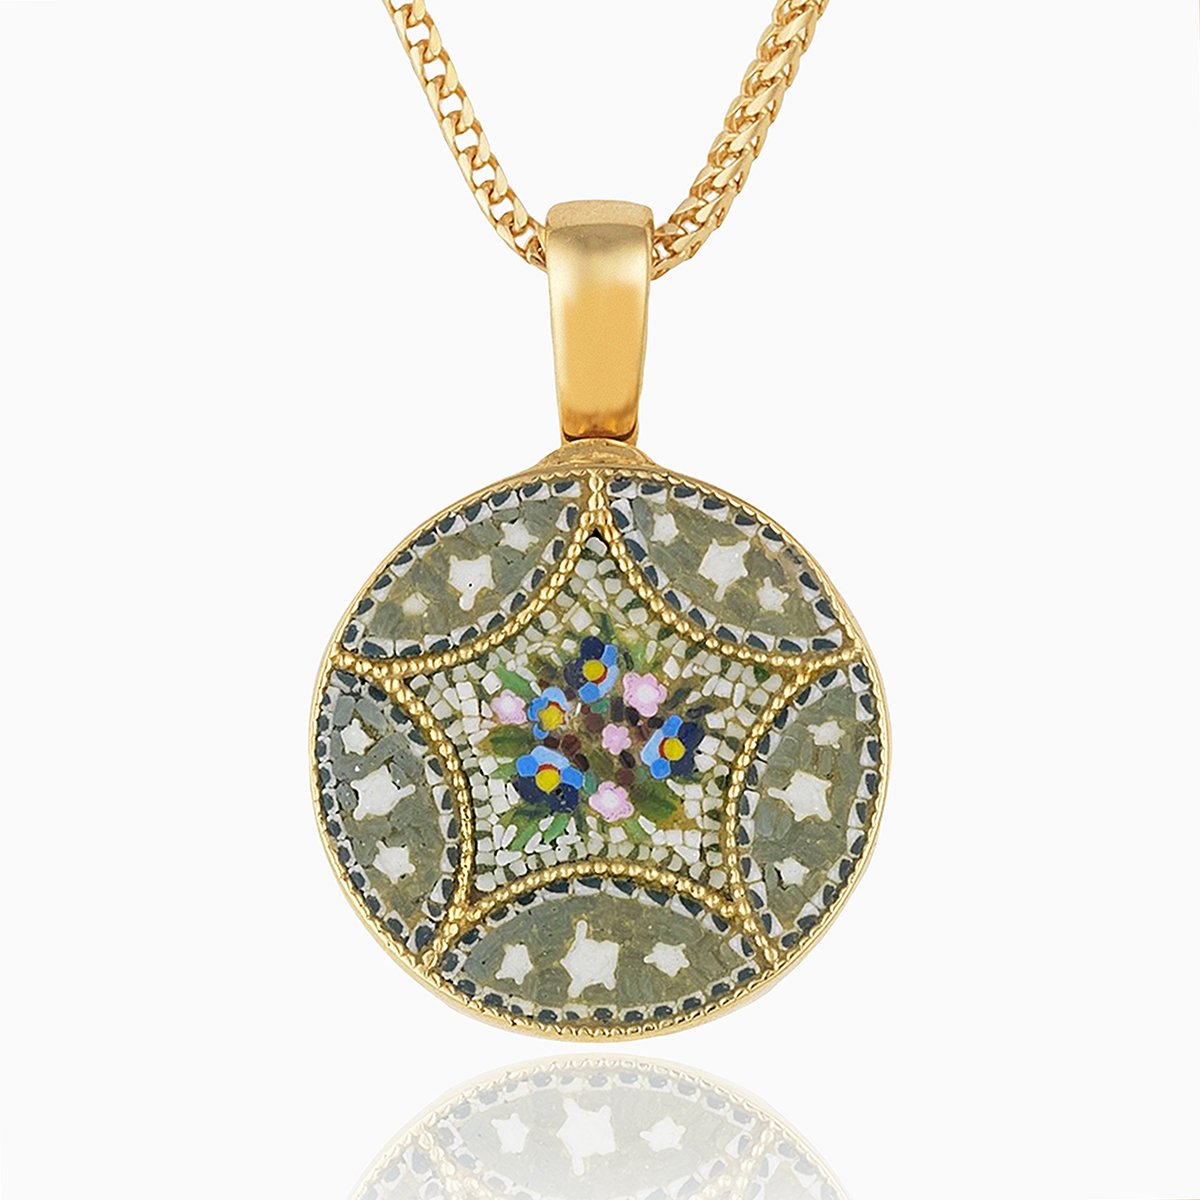 18 ct round gold locket set with a micromosaic floral design on an 18 ct gold franco chain